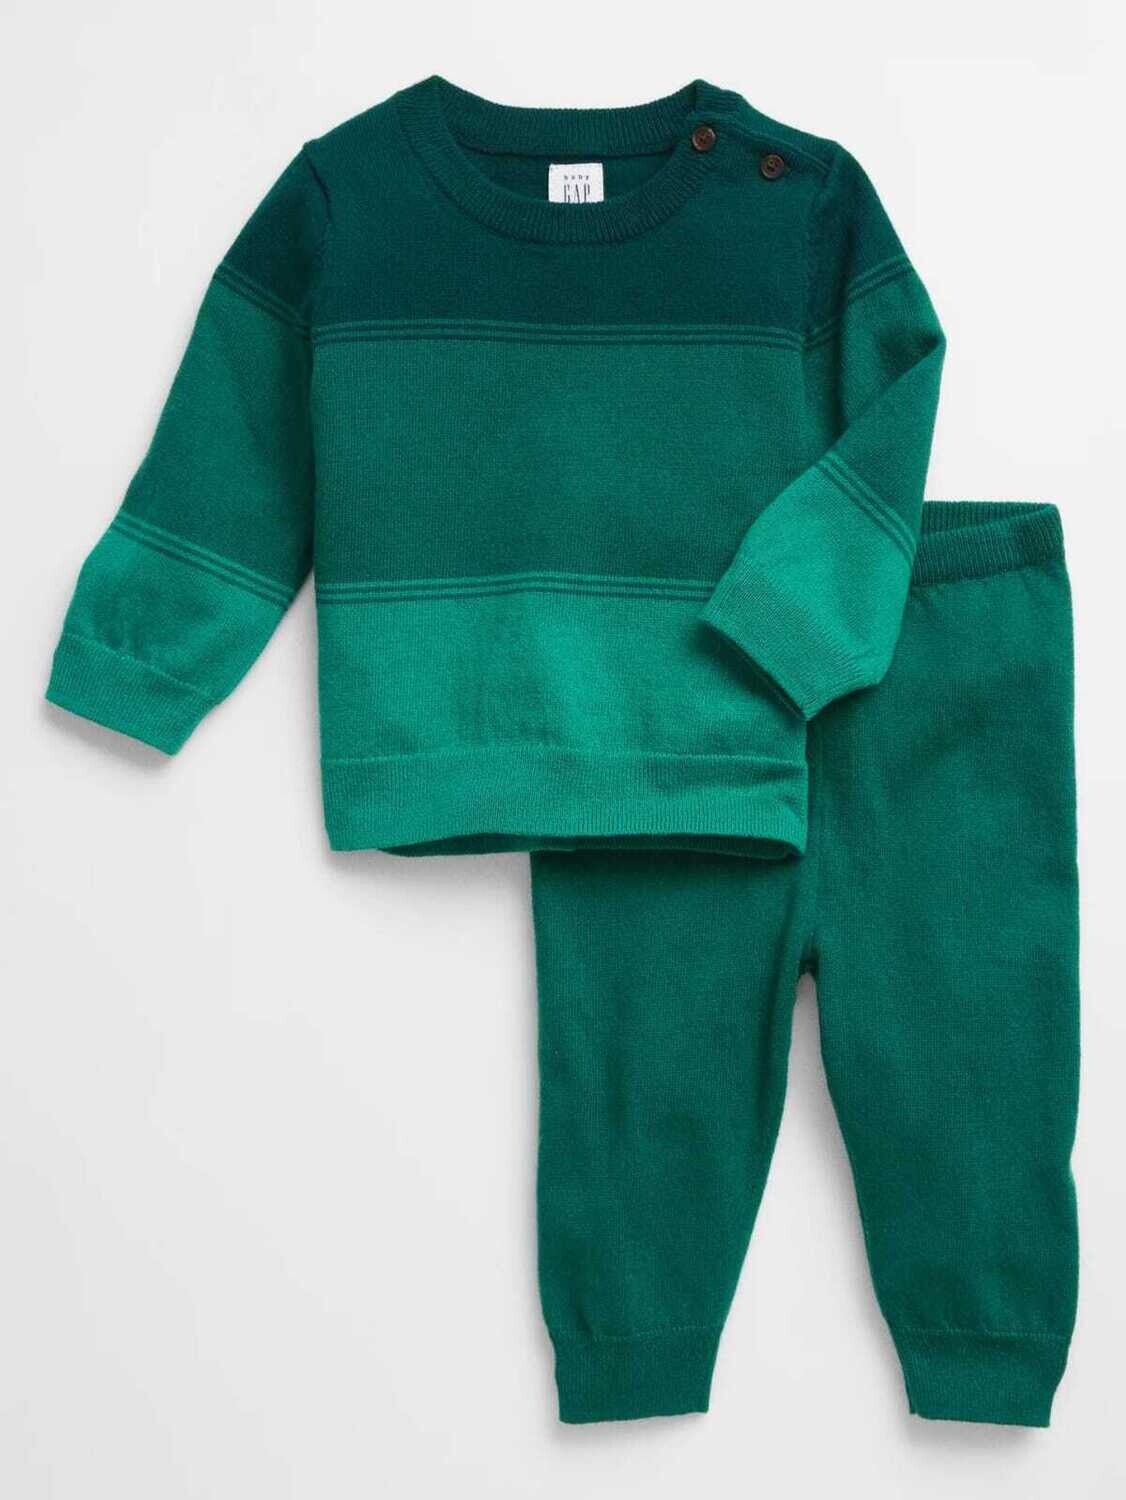 Gap Baby Stripe Sweater Outfit Set